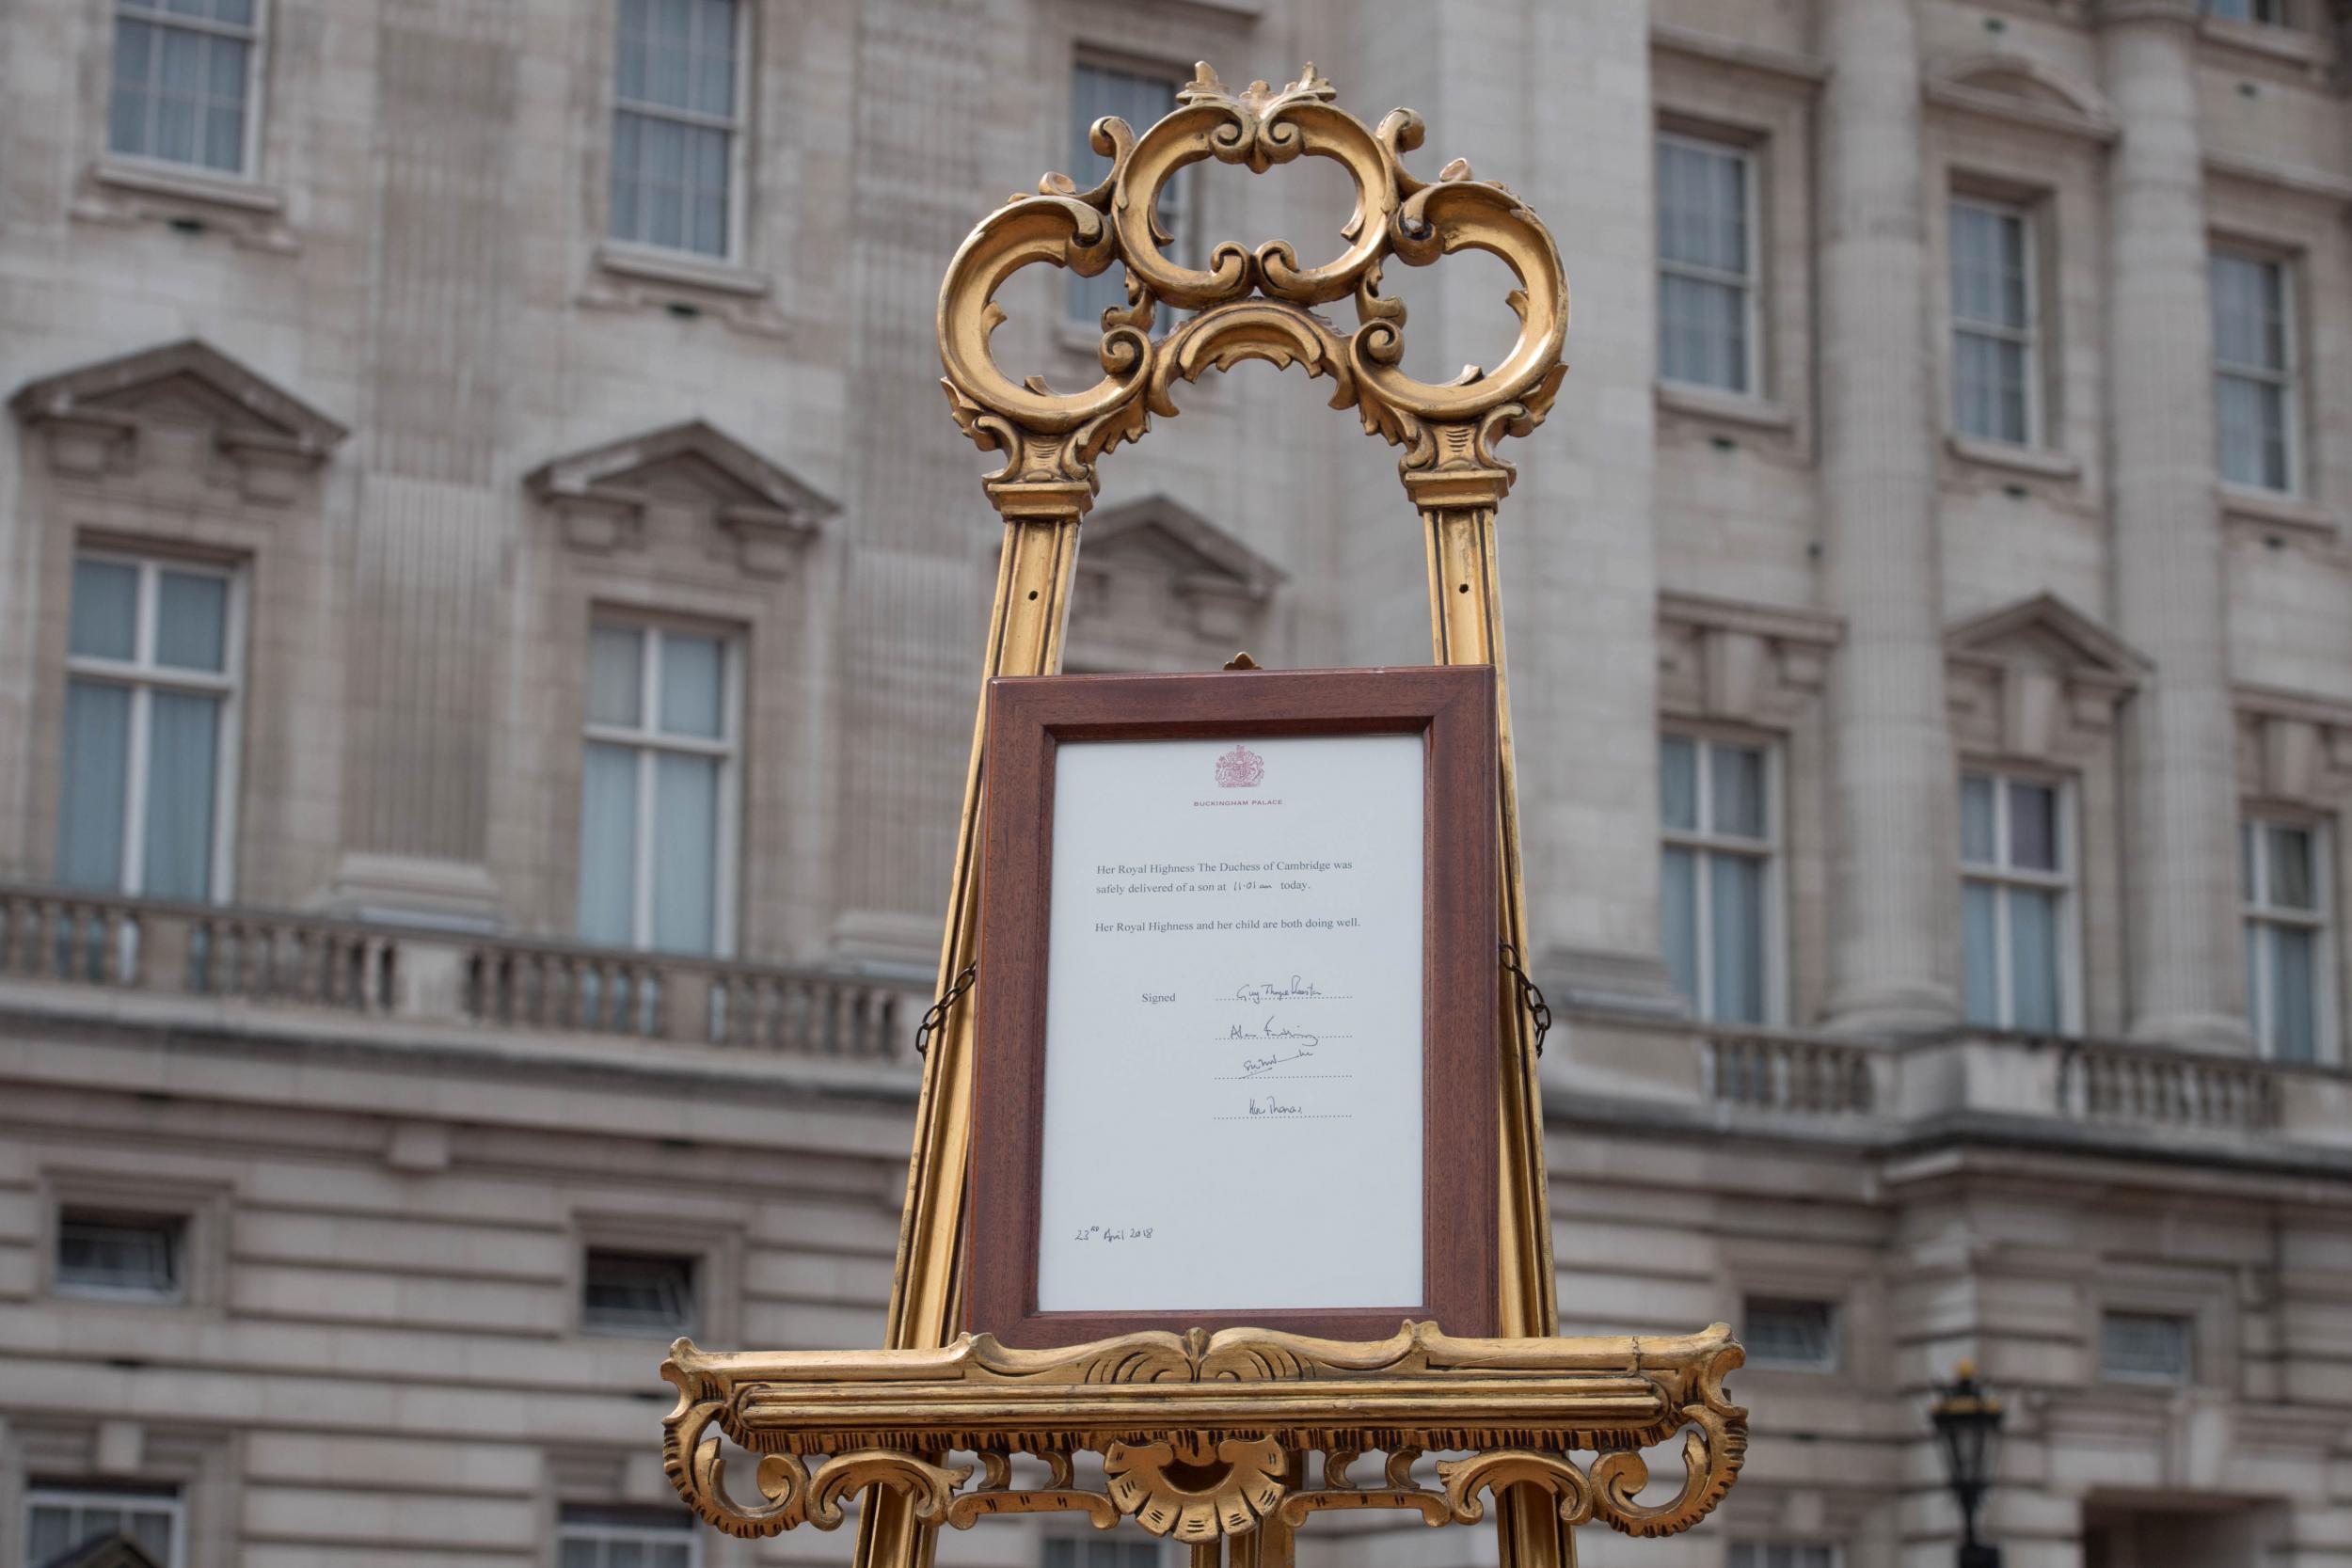 Royal births are traditionally announced via a statement placed on an easel in the forecourt of Buckingham Palace for the public to see